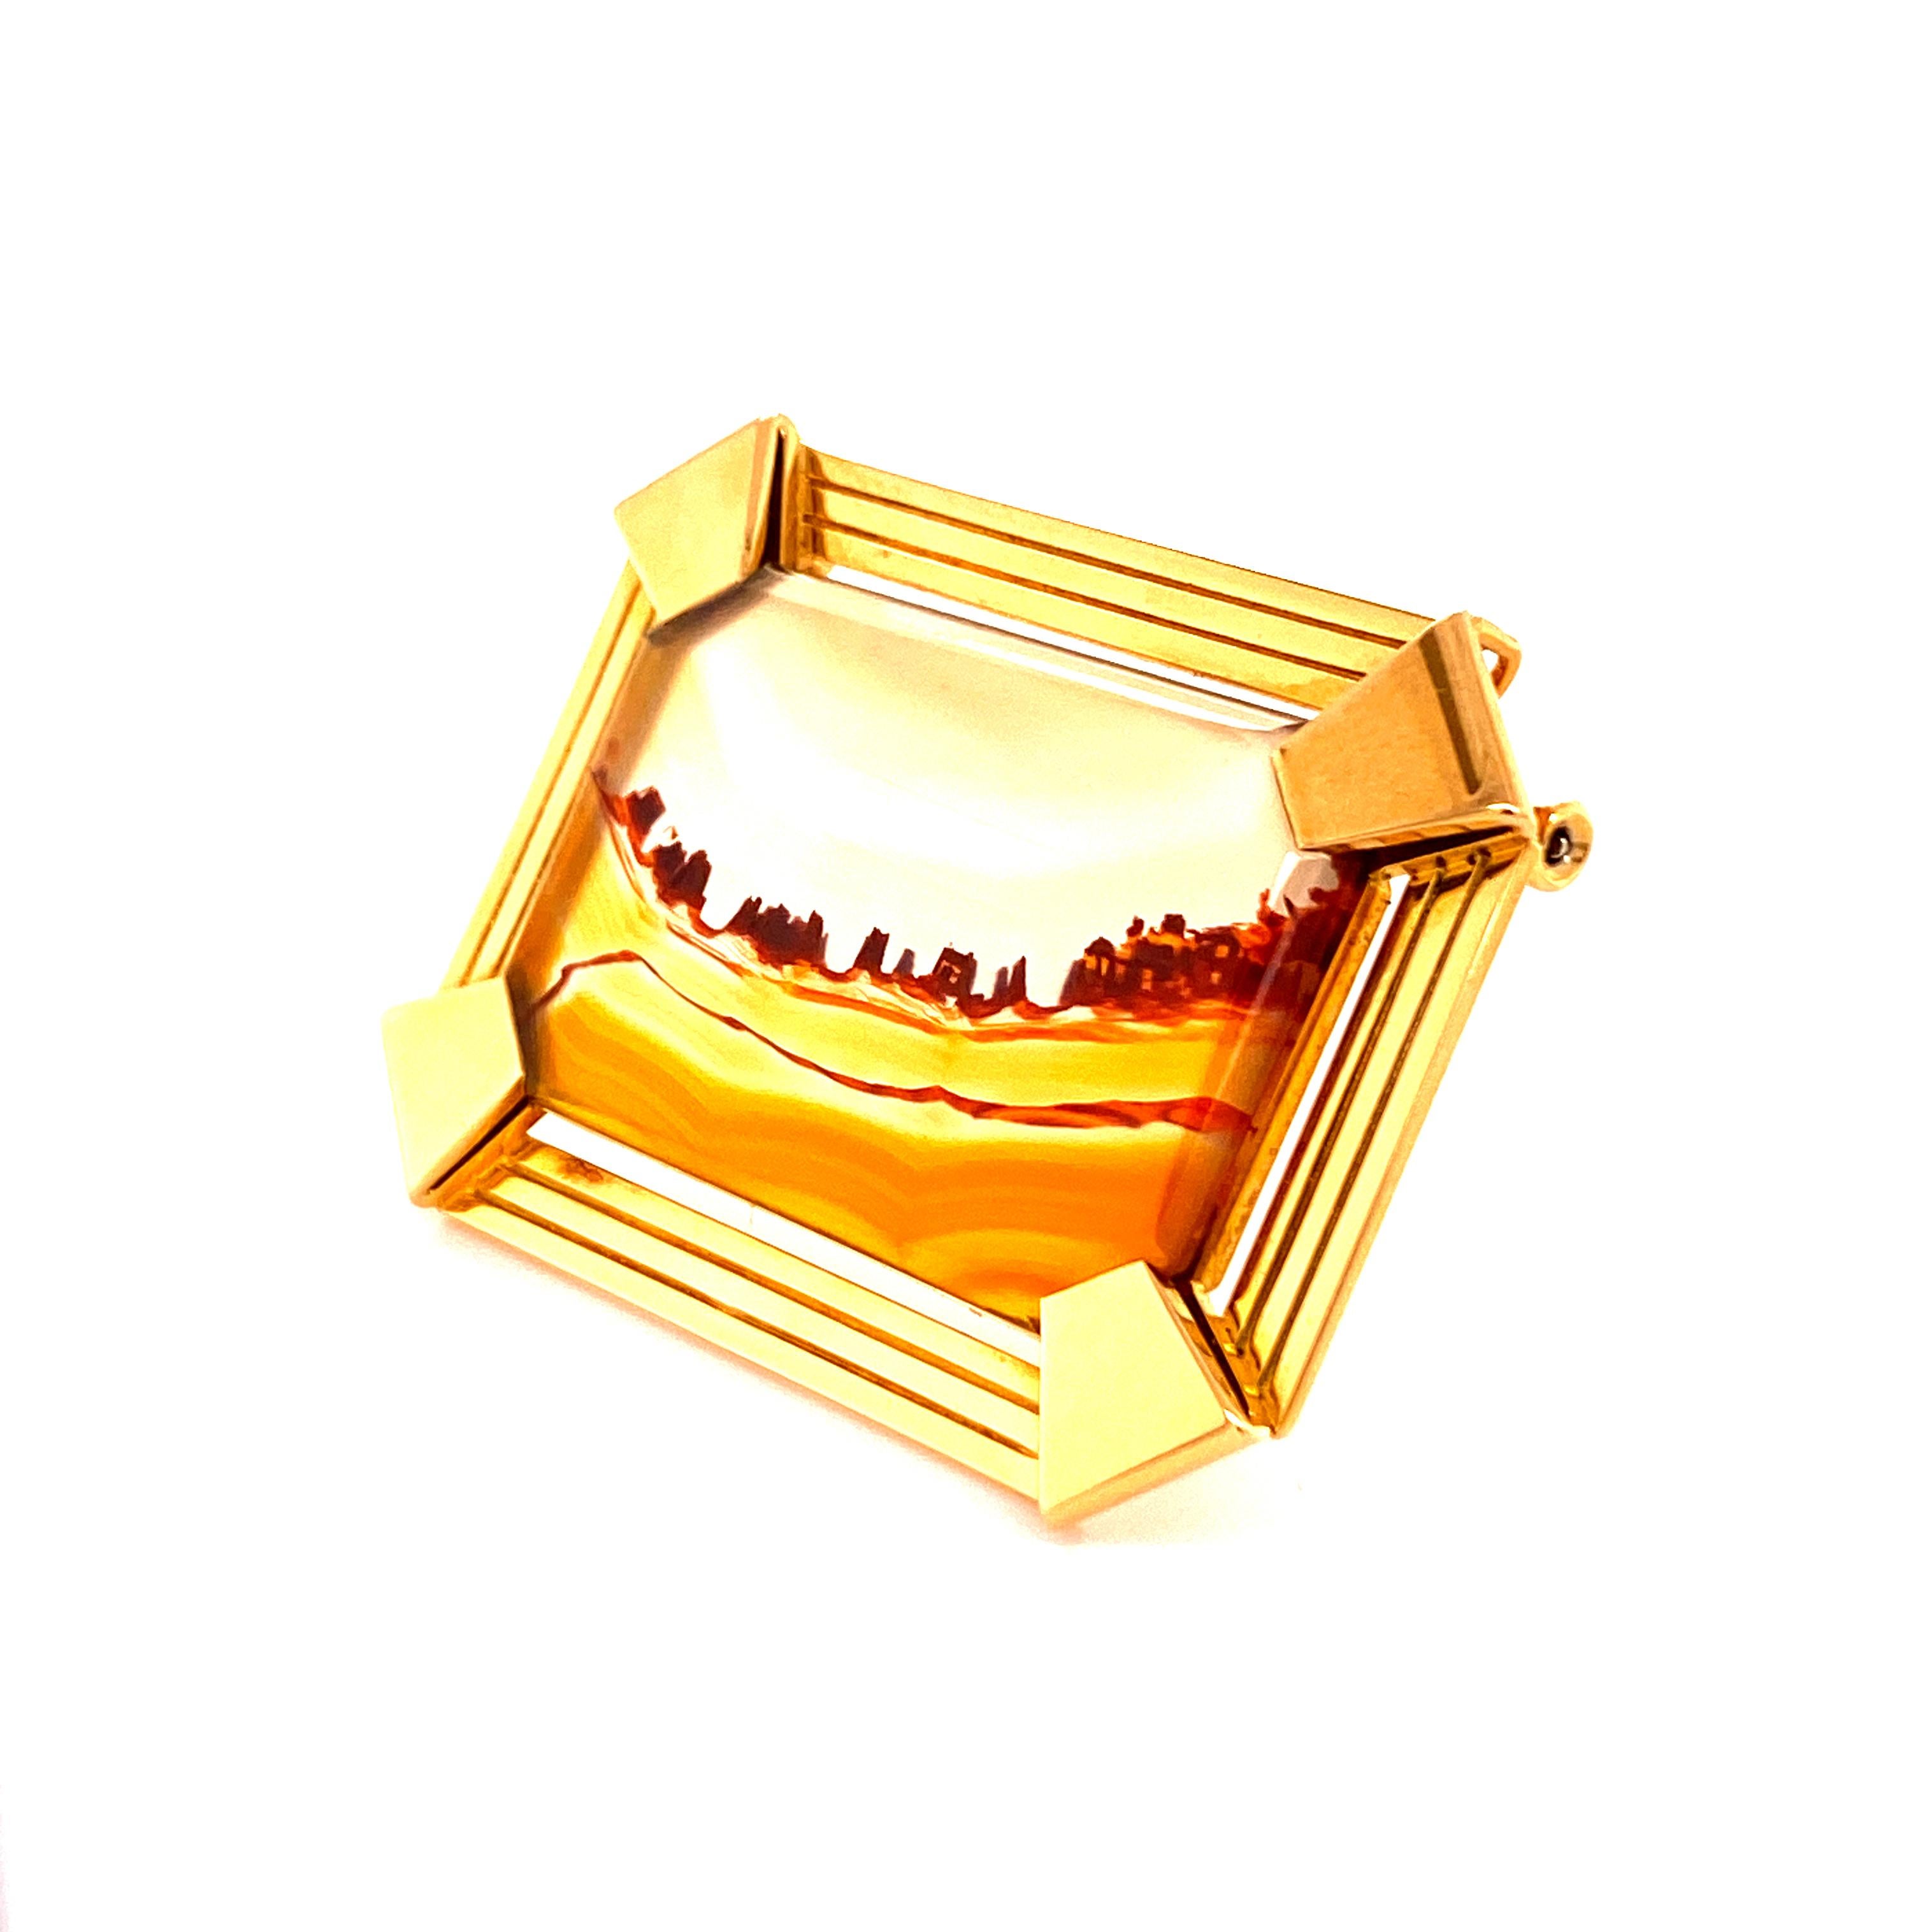 Square Cut Gubelin Brooch / Pendant with Landscape Agate in Yellow Gold 18 Karat